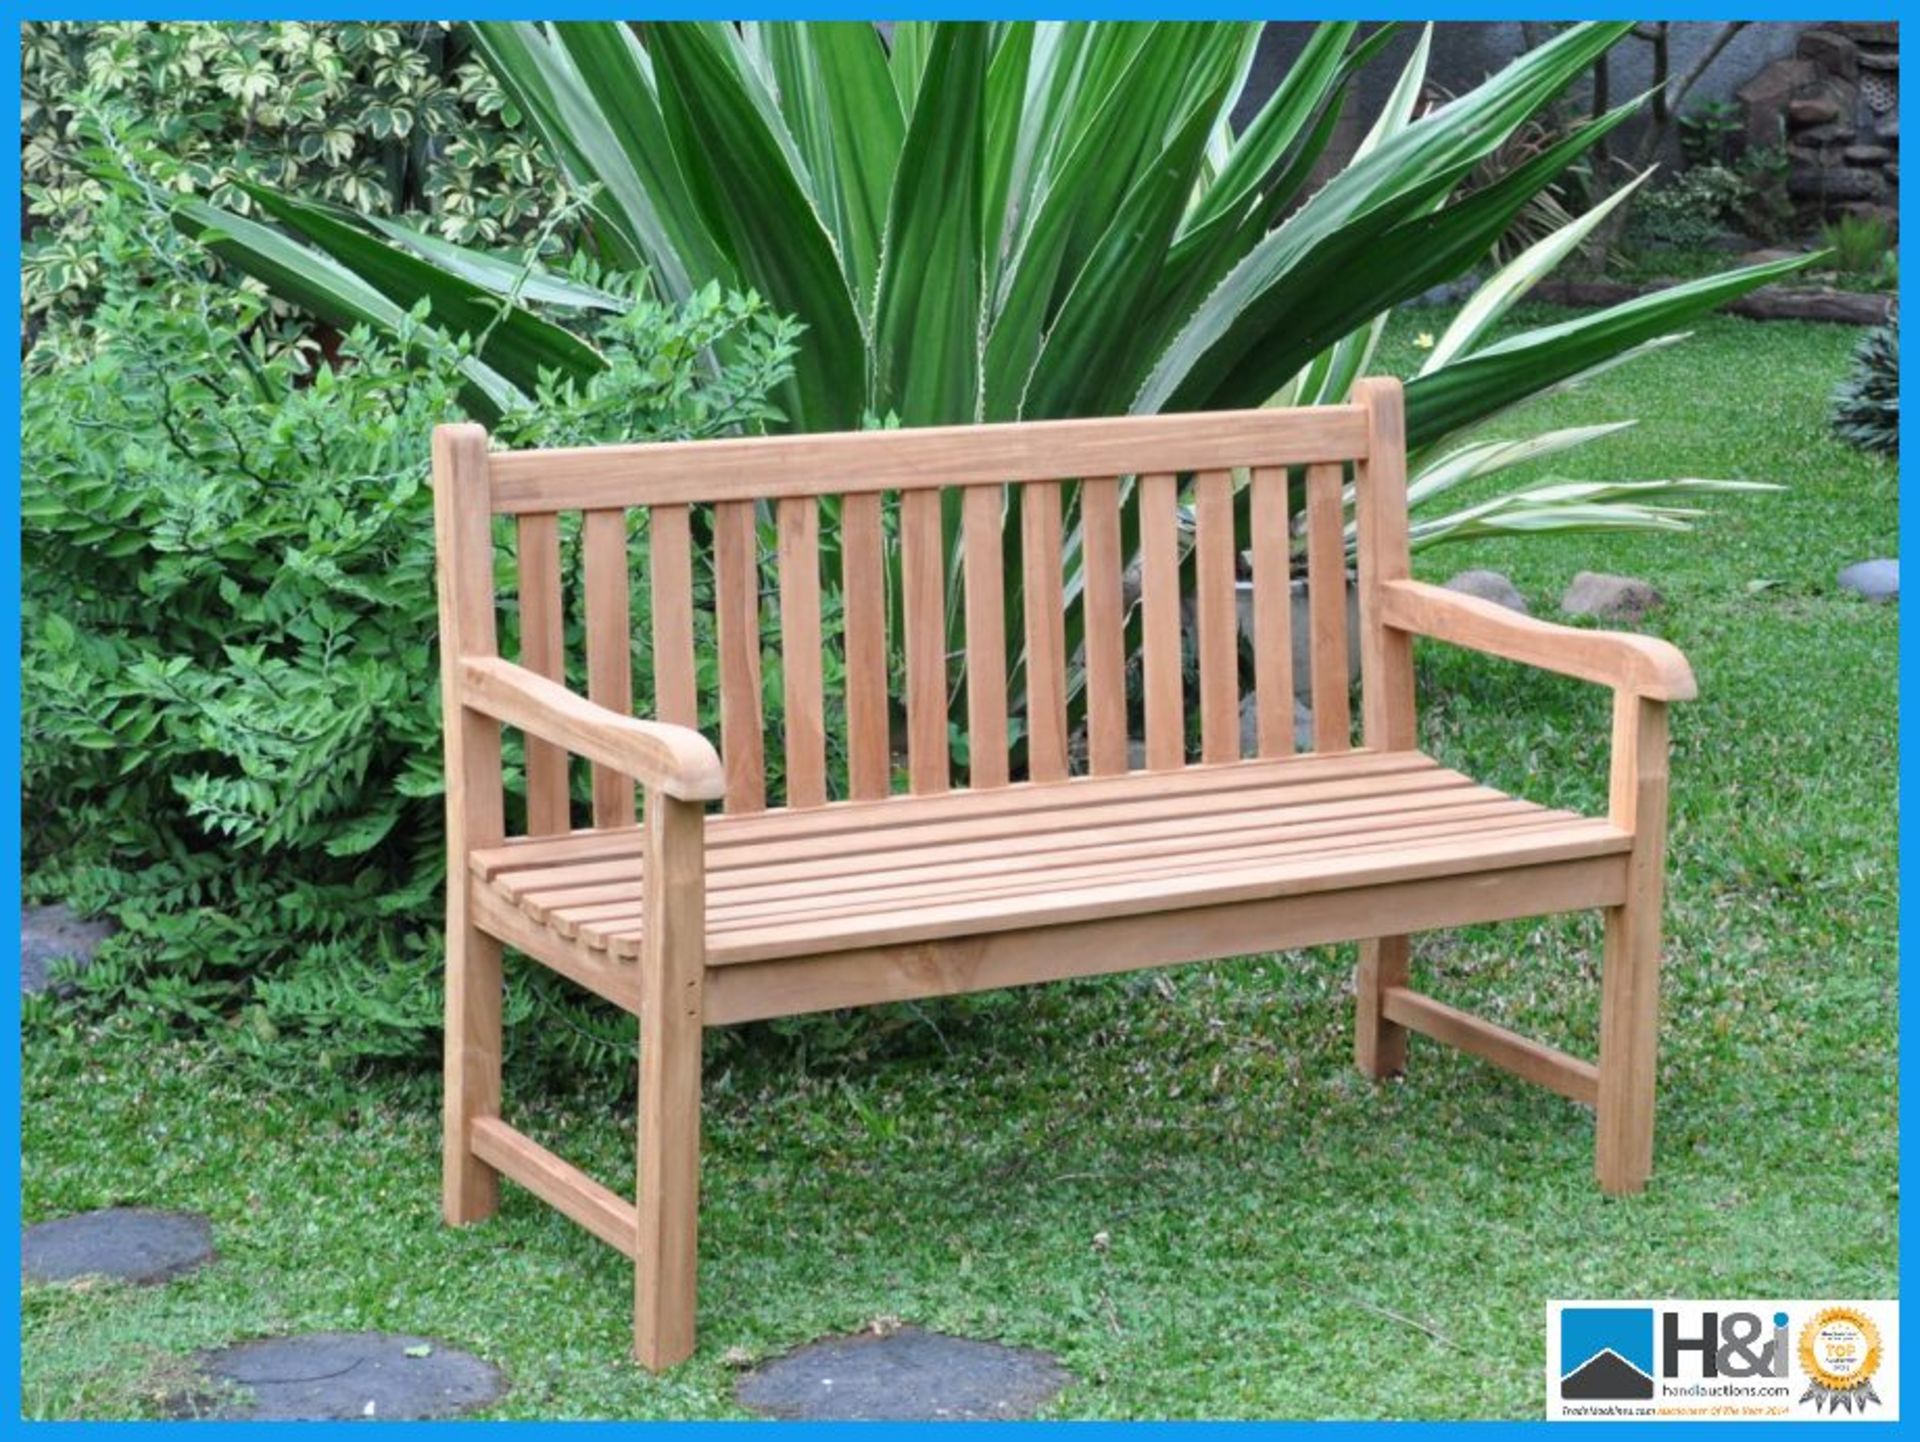 Teak 2 Seat Garden Bench. This solid teak bench will give a beautiful and elegant look to any